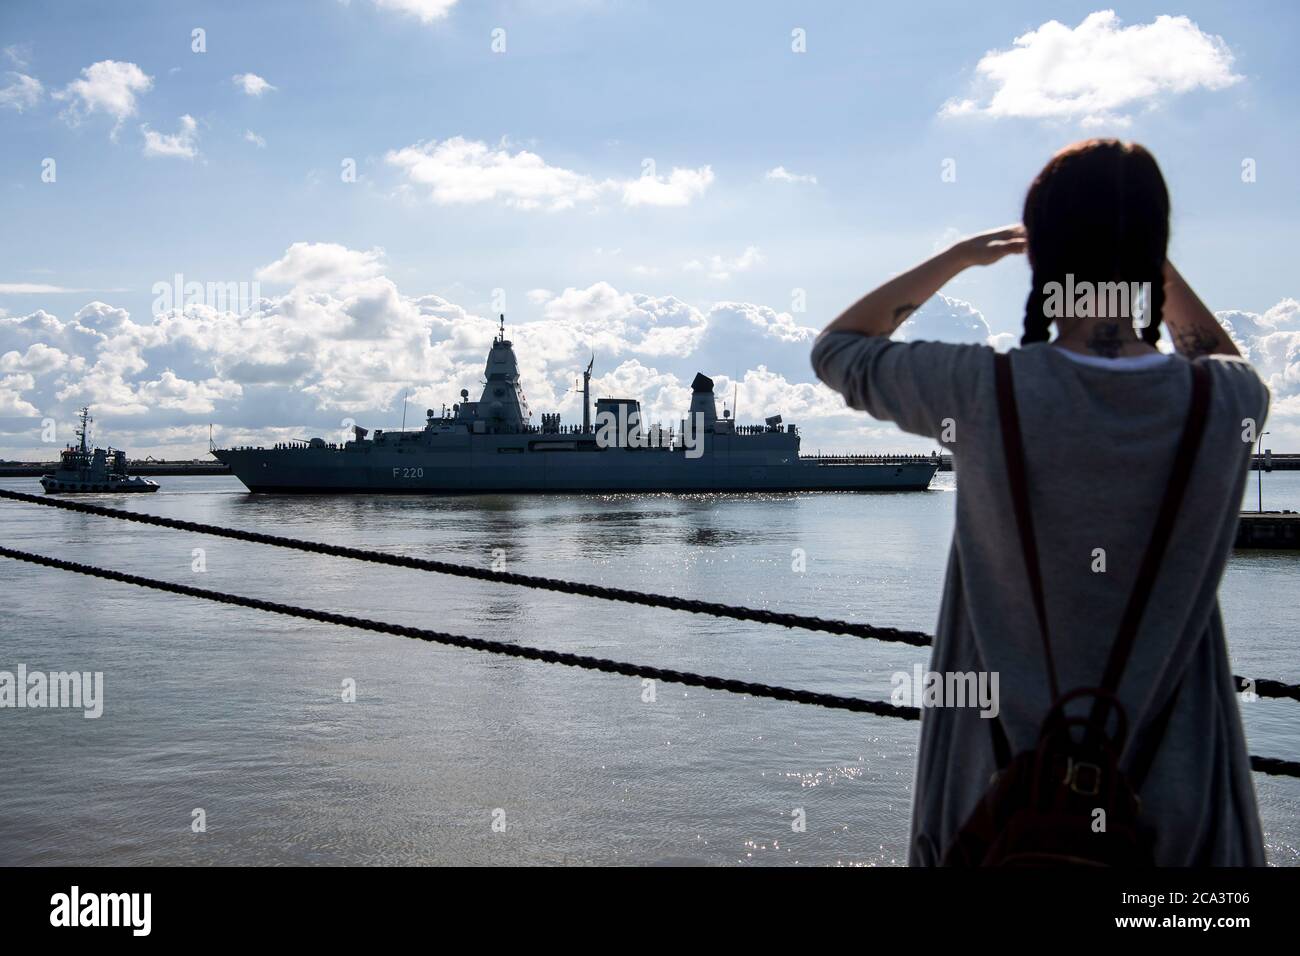 Wilhelmshaven, Germany. 04th Aug, 2020. The frigate 'Hamburg' runs out of the harbour. The frigate has sailed off the coast of the civil war-torn country Libya for a five-month Mediterranean mission as part of the European Union's Irini foreign mission. Credit: Sina Schuldt/dpa/Alamy Live News Stock Photo